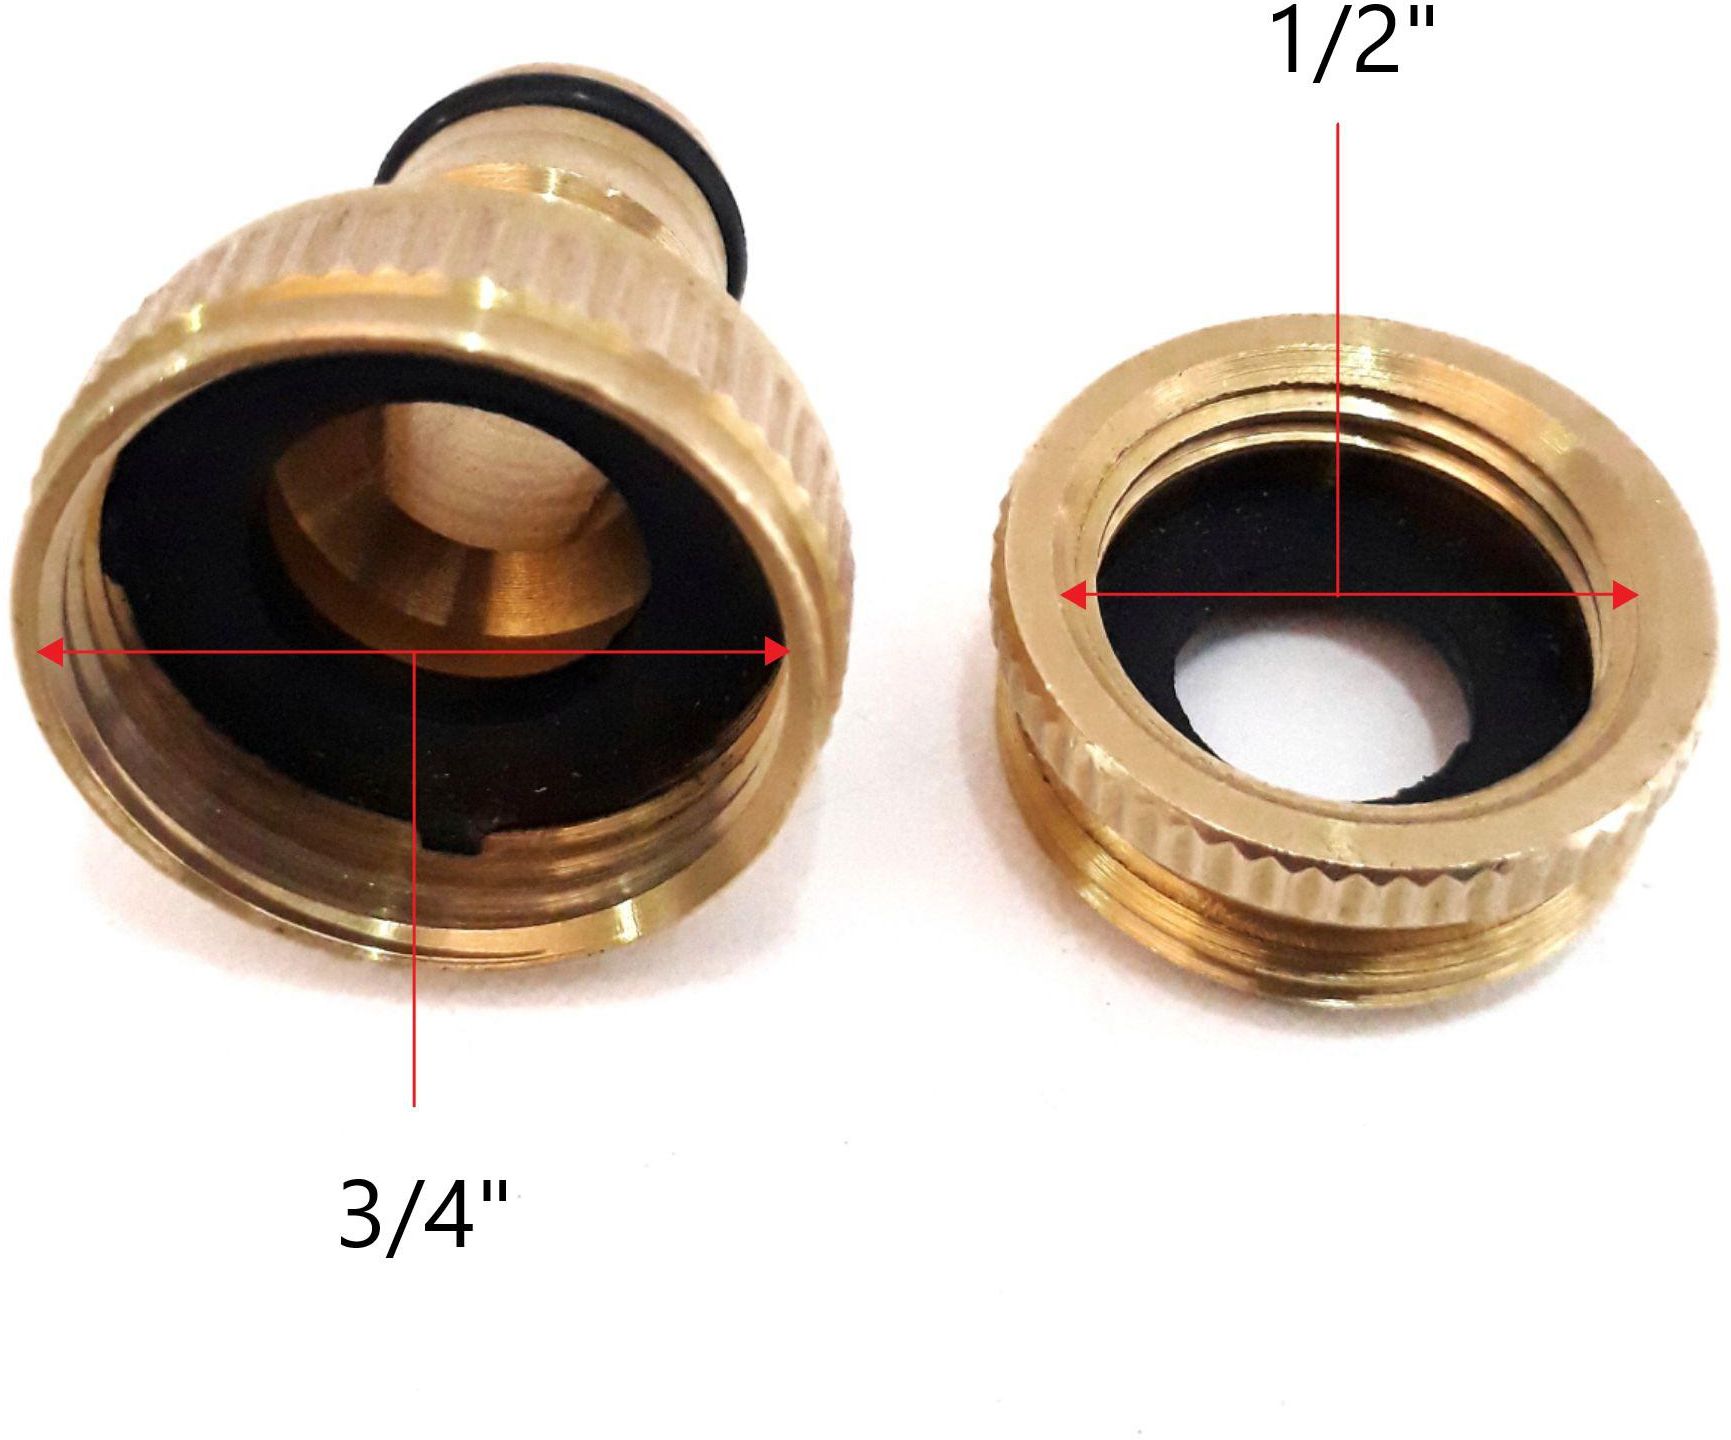 Solid Full Brass Adaptor 3/4 Inch With 1/2 Inch Thread Reducer for Garden Hose